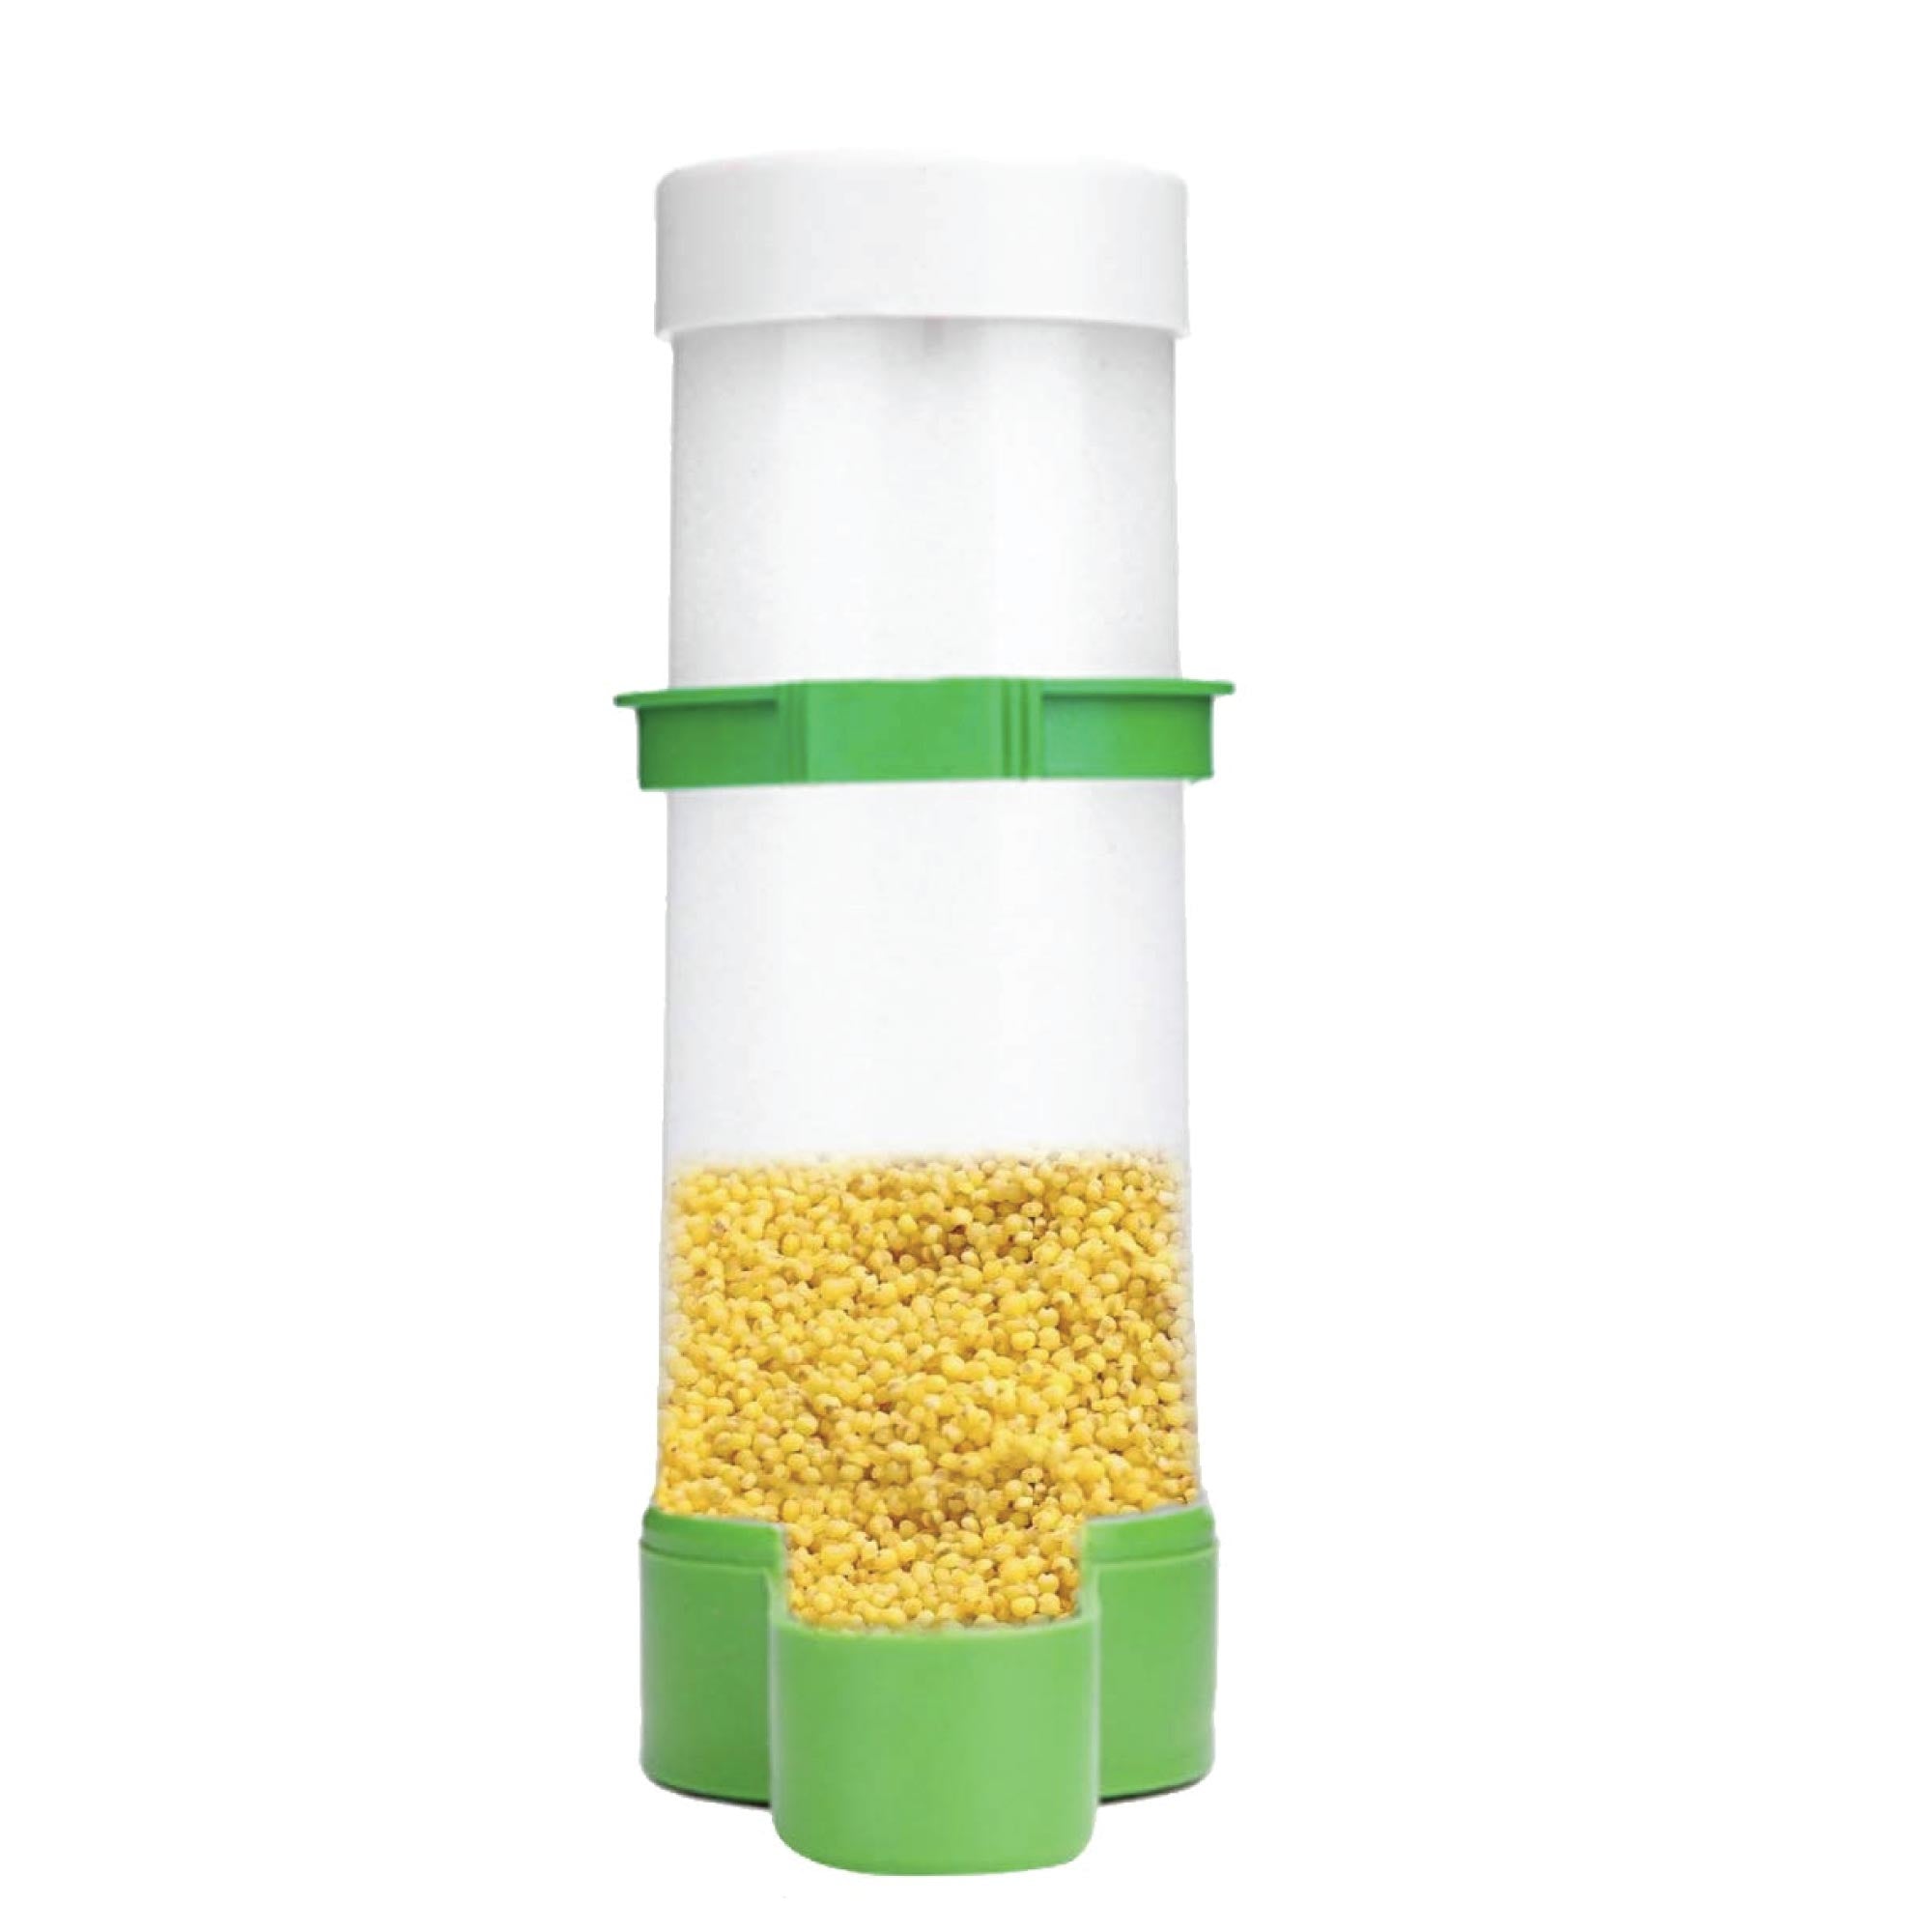 Bird Cage Food Dispenser Feeder Automatic Pet Parrot Budgie Cockatiel Aviary - 0